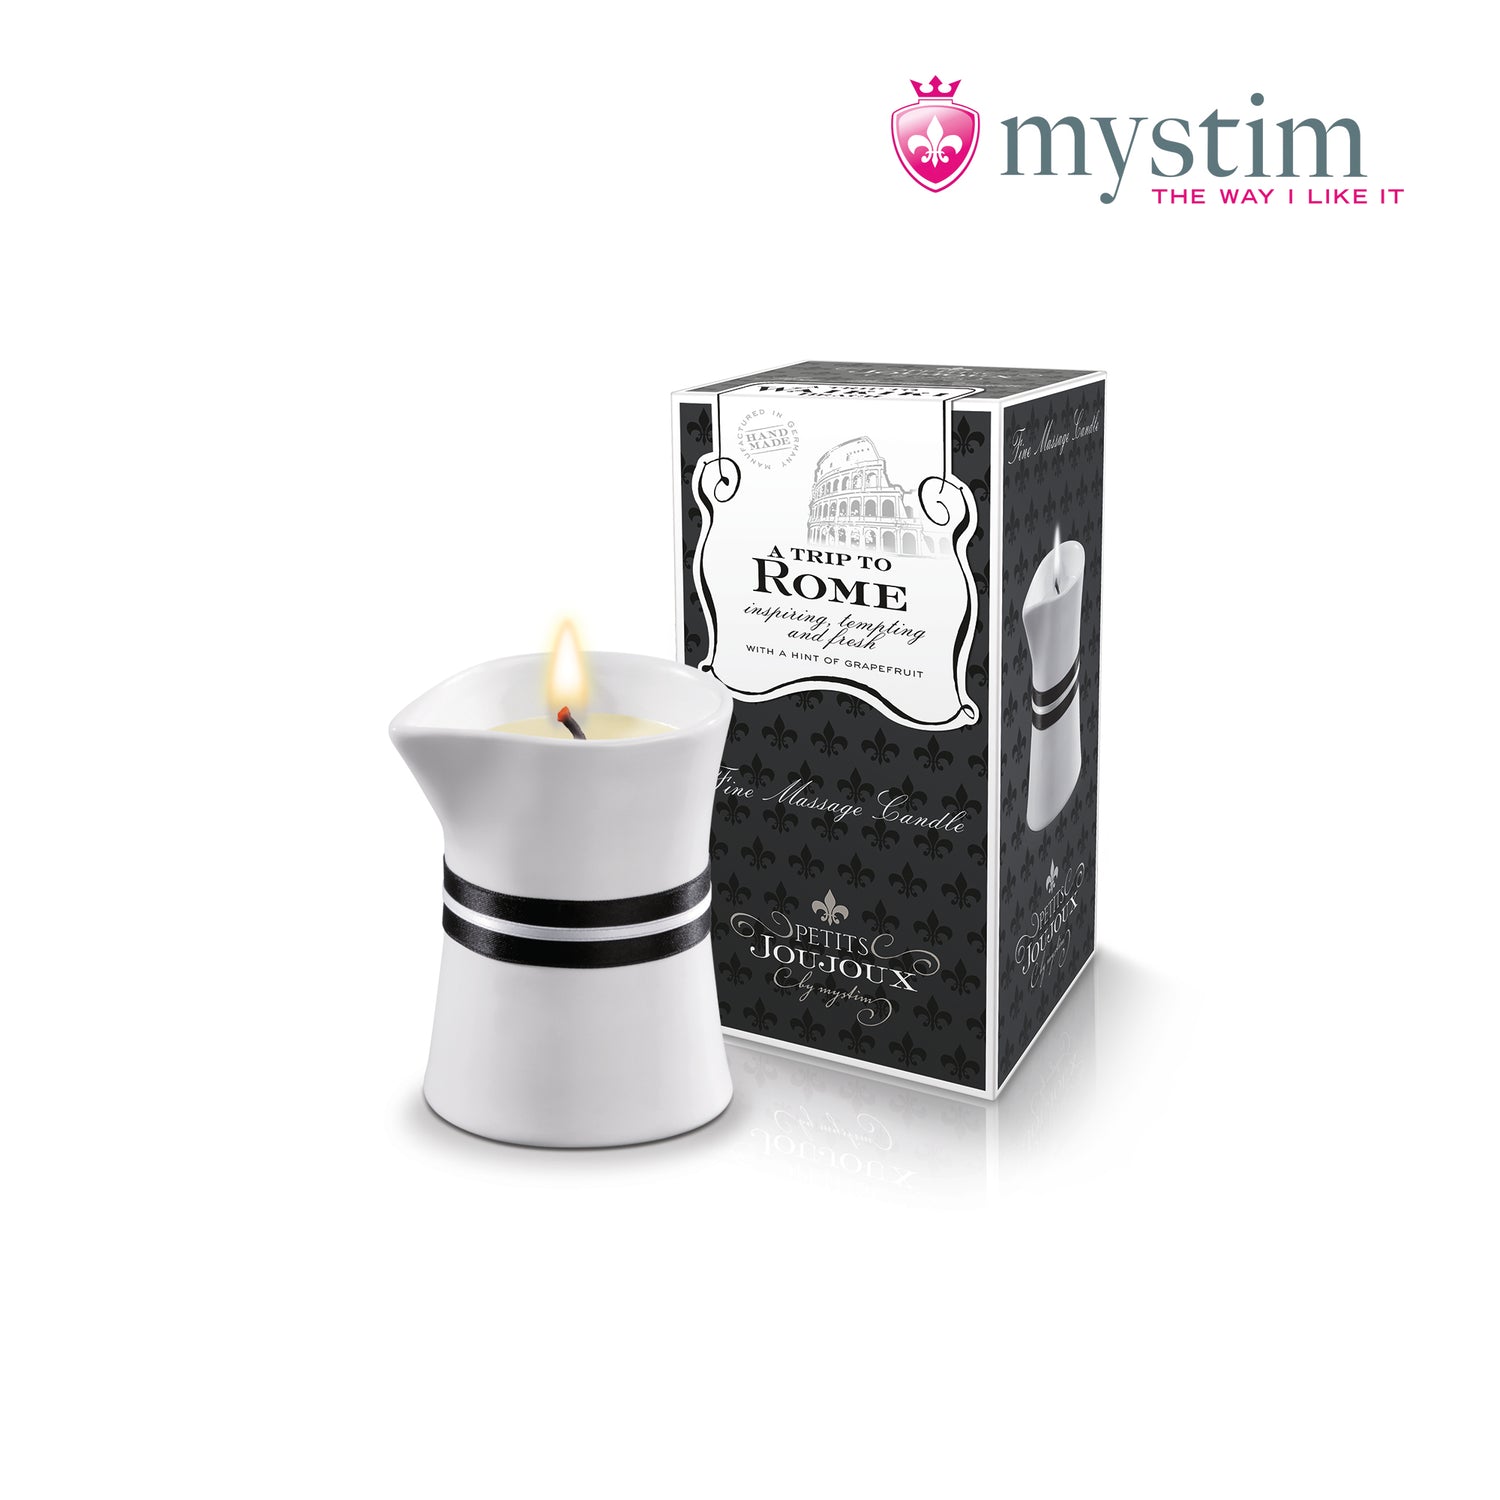 Petits Joujoux A Trip to Rome Massage Candle 120ml - Just for you desires